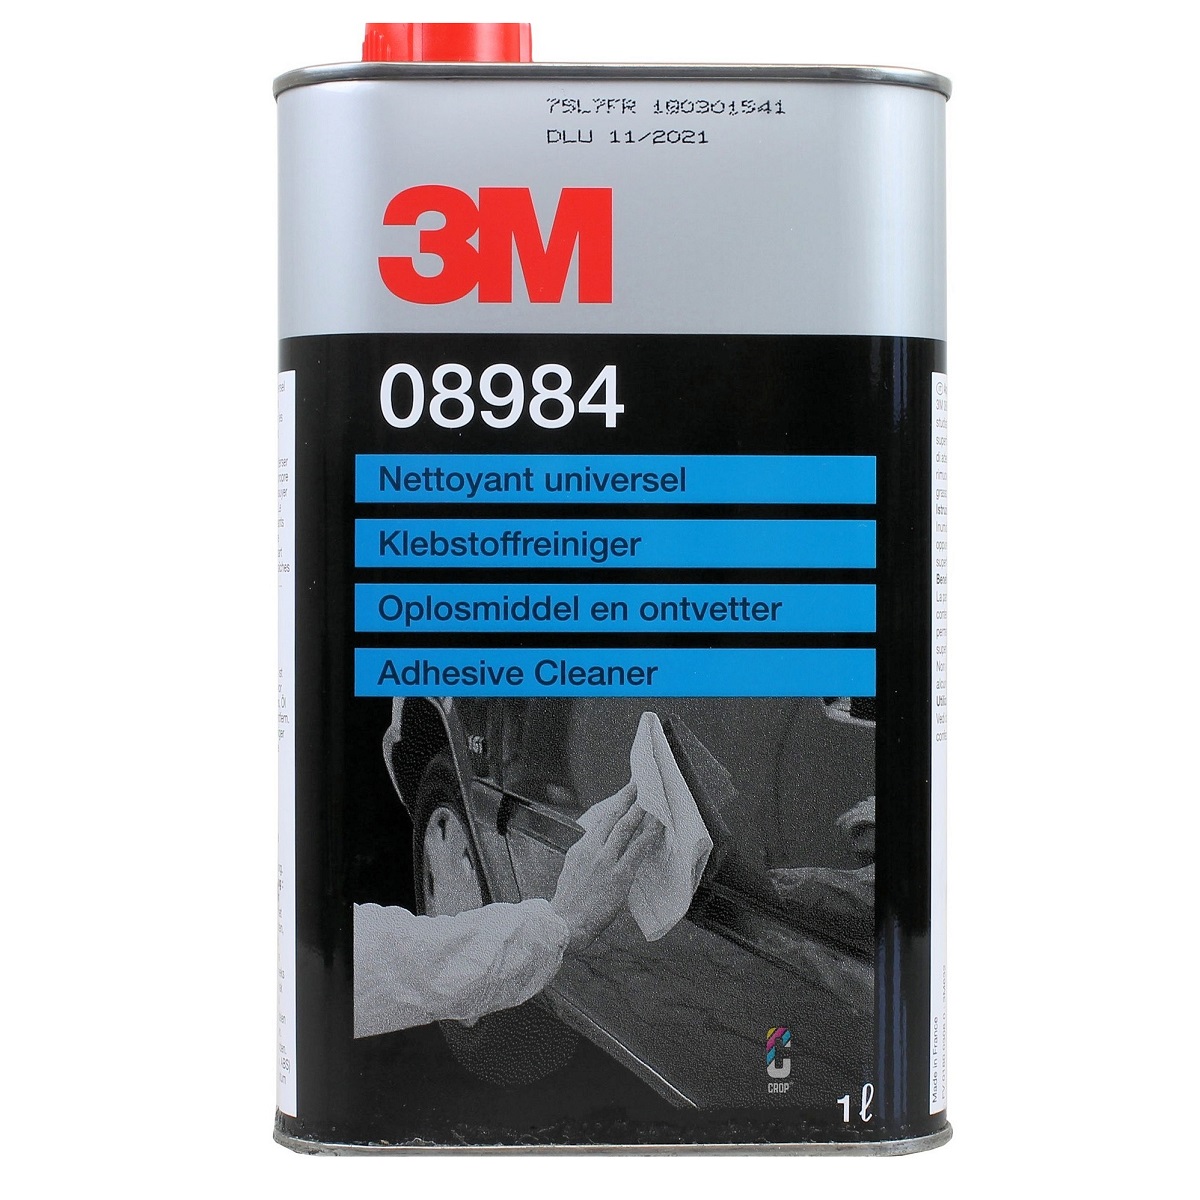 https://www.sealantsandtoolsdirect.co.uk/image/catalog/manufacturer-new/3m-/08984/3m-08984-adhesive-cleaner-cleaning-solvent-1.jpg